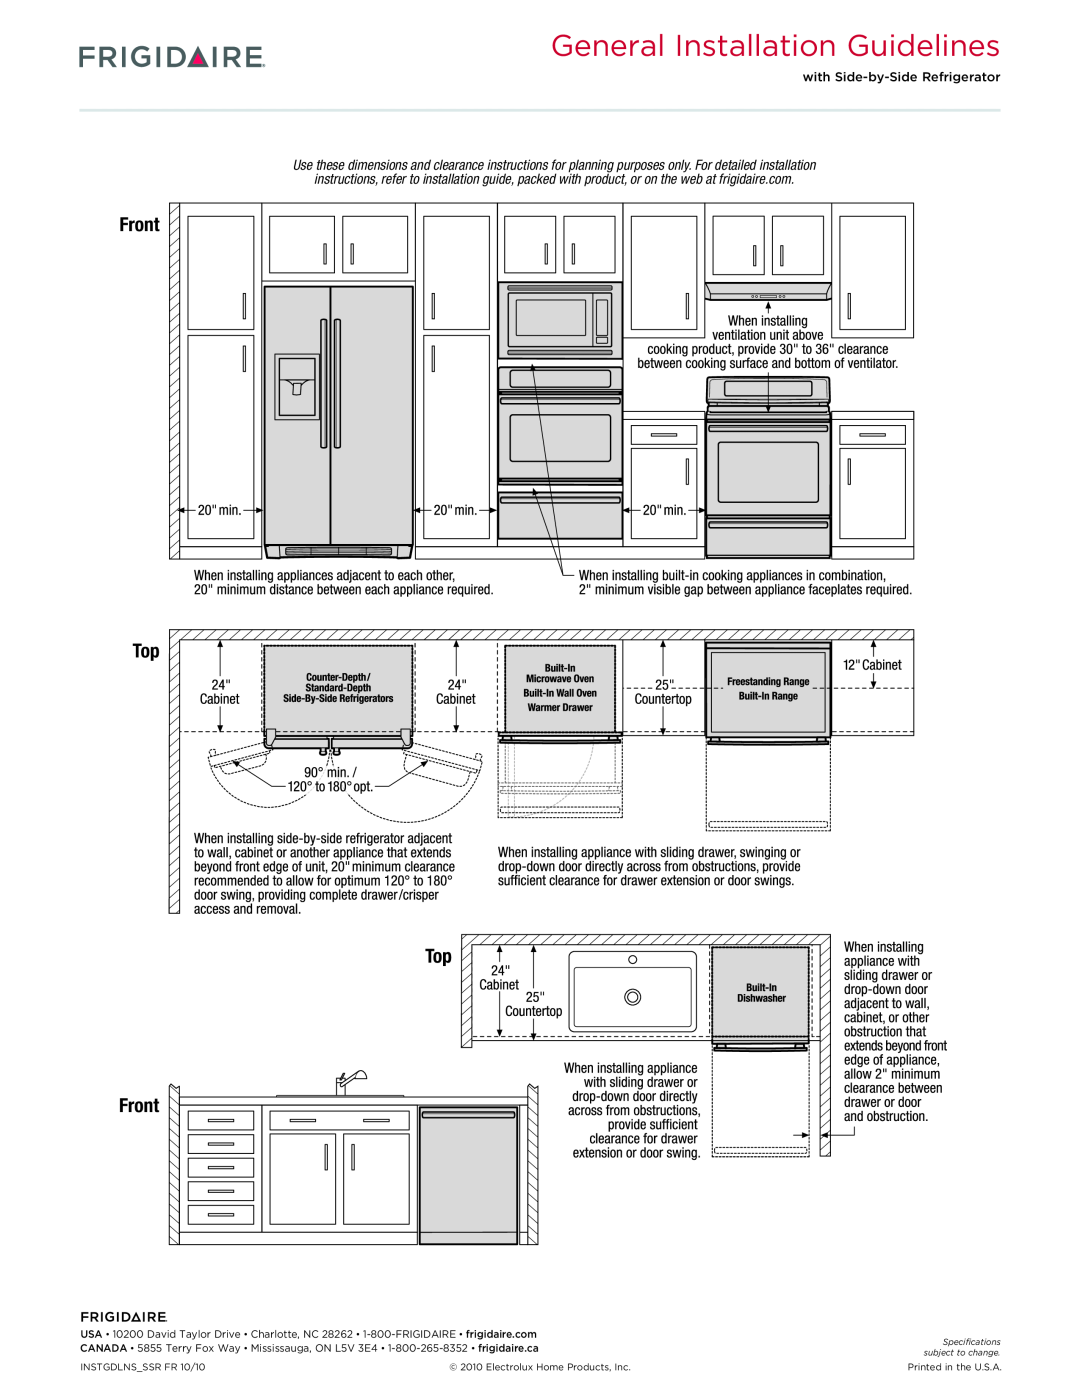 Frigidaire FFGS3025L S/W/B dimensions General Installation Guidelines, Top Front 